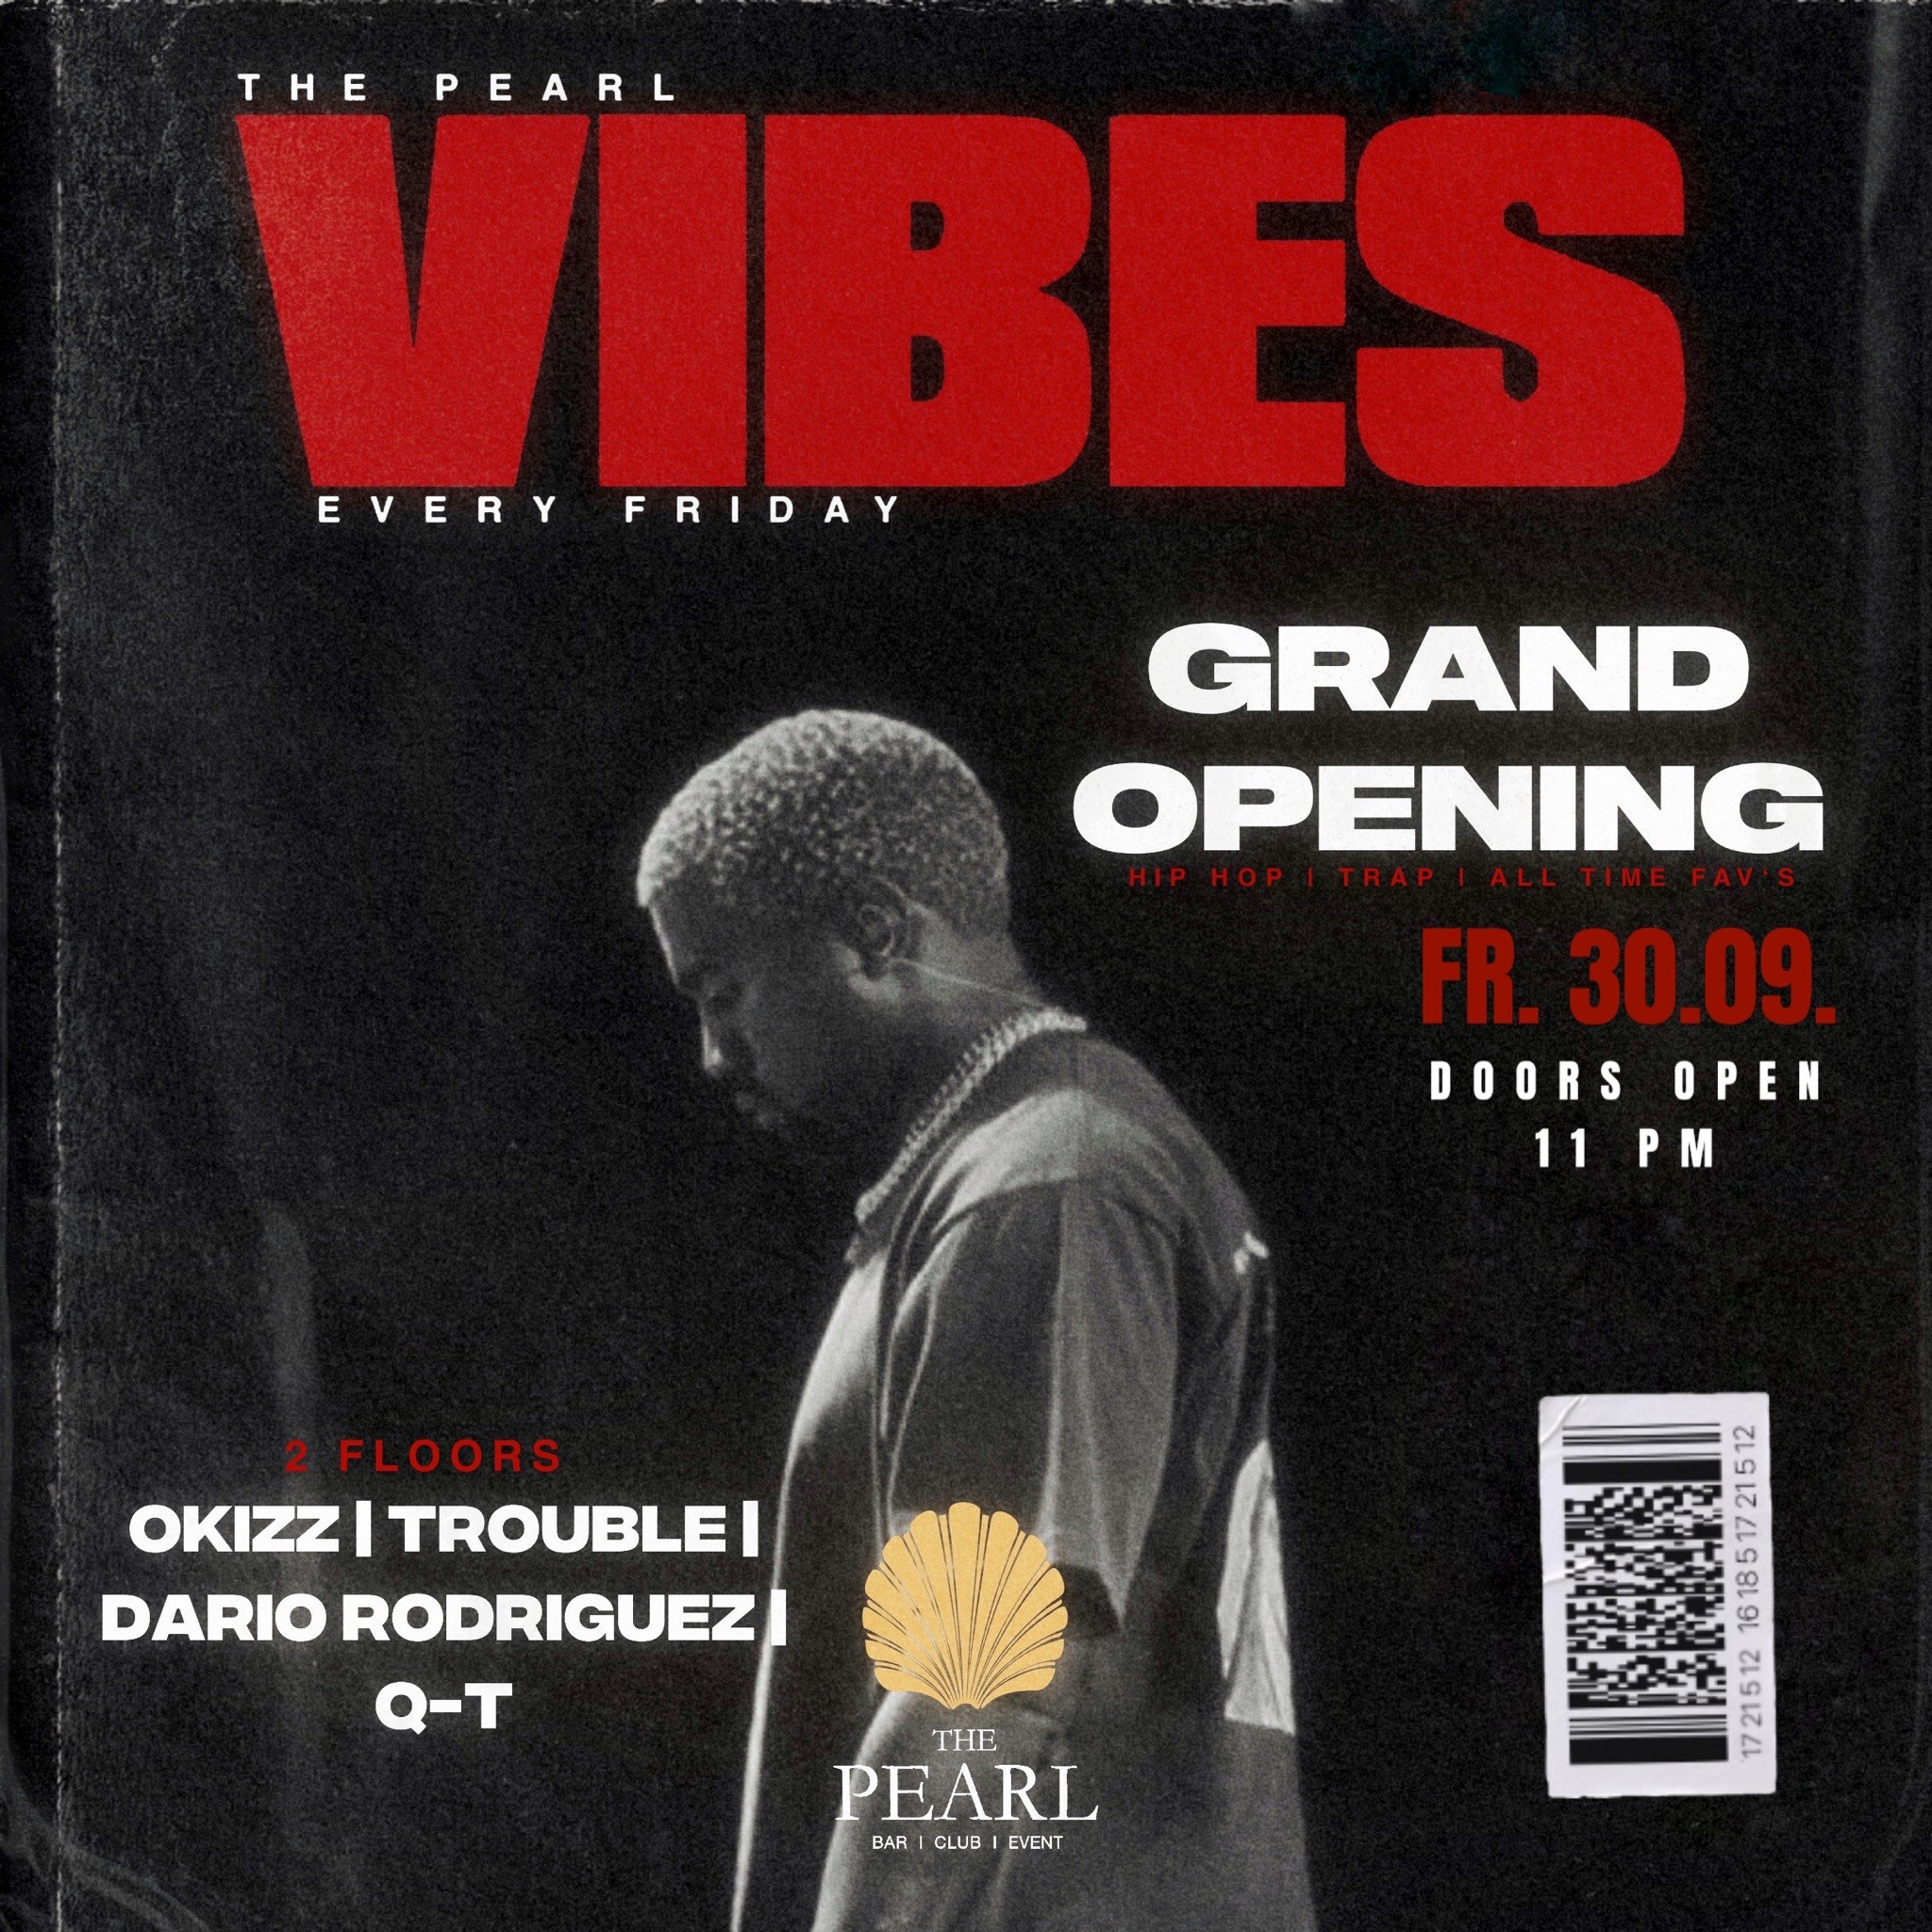 The Pearl 30.09.2022 The Pearl pres. Vibes | The Grand Opening